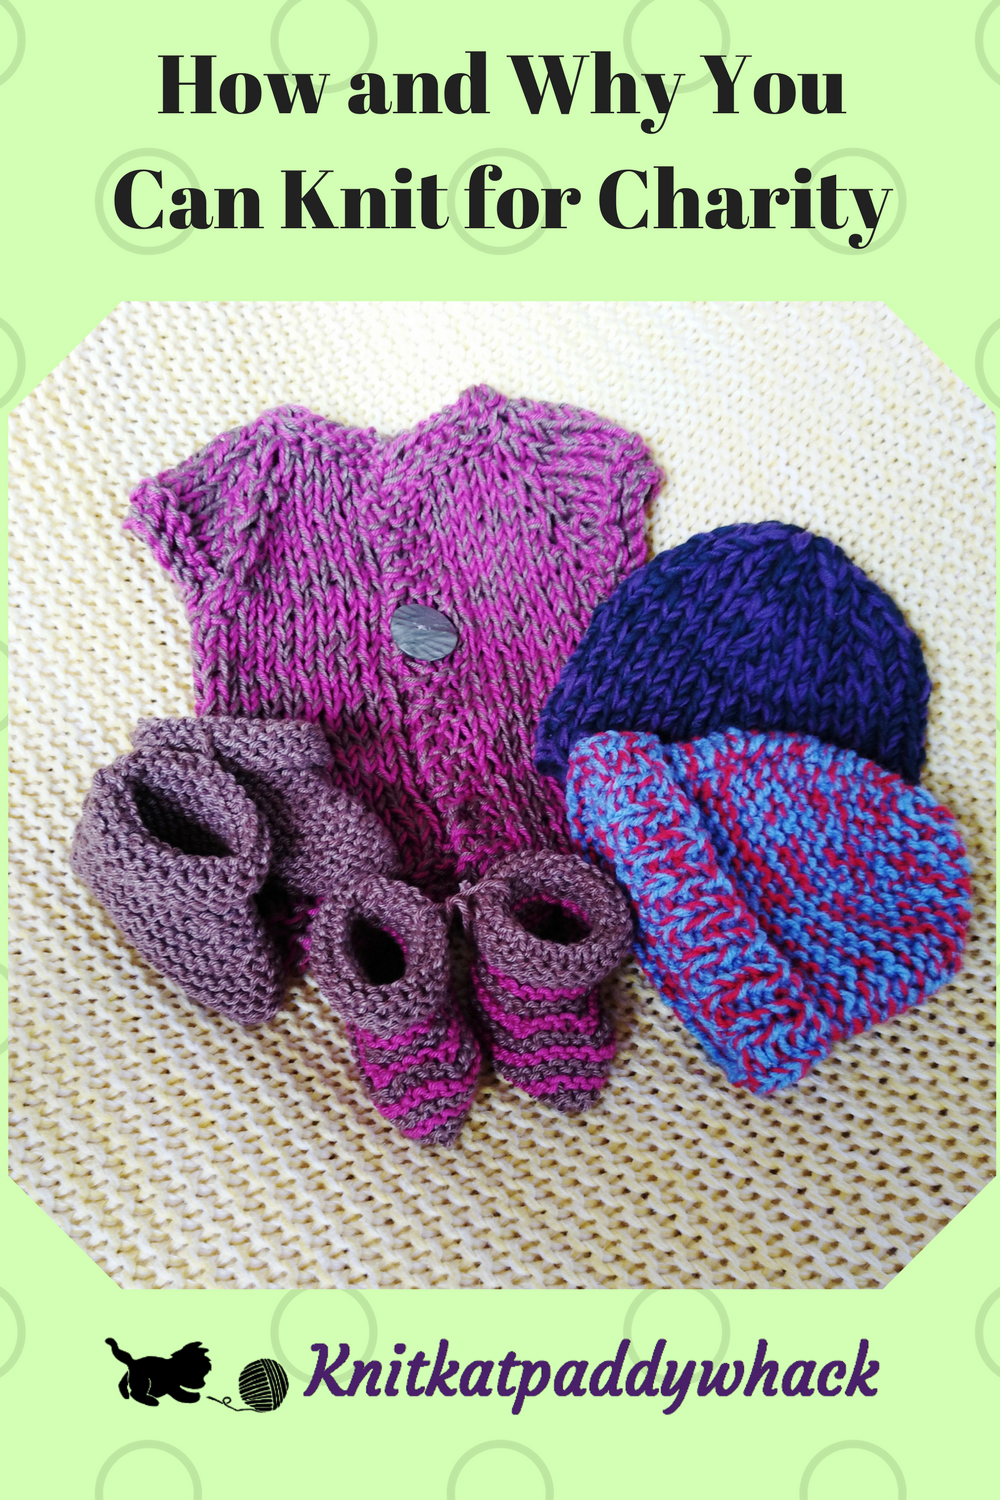 Charity knitted items with blog post title